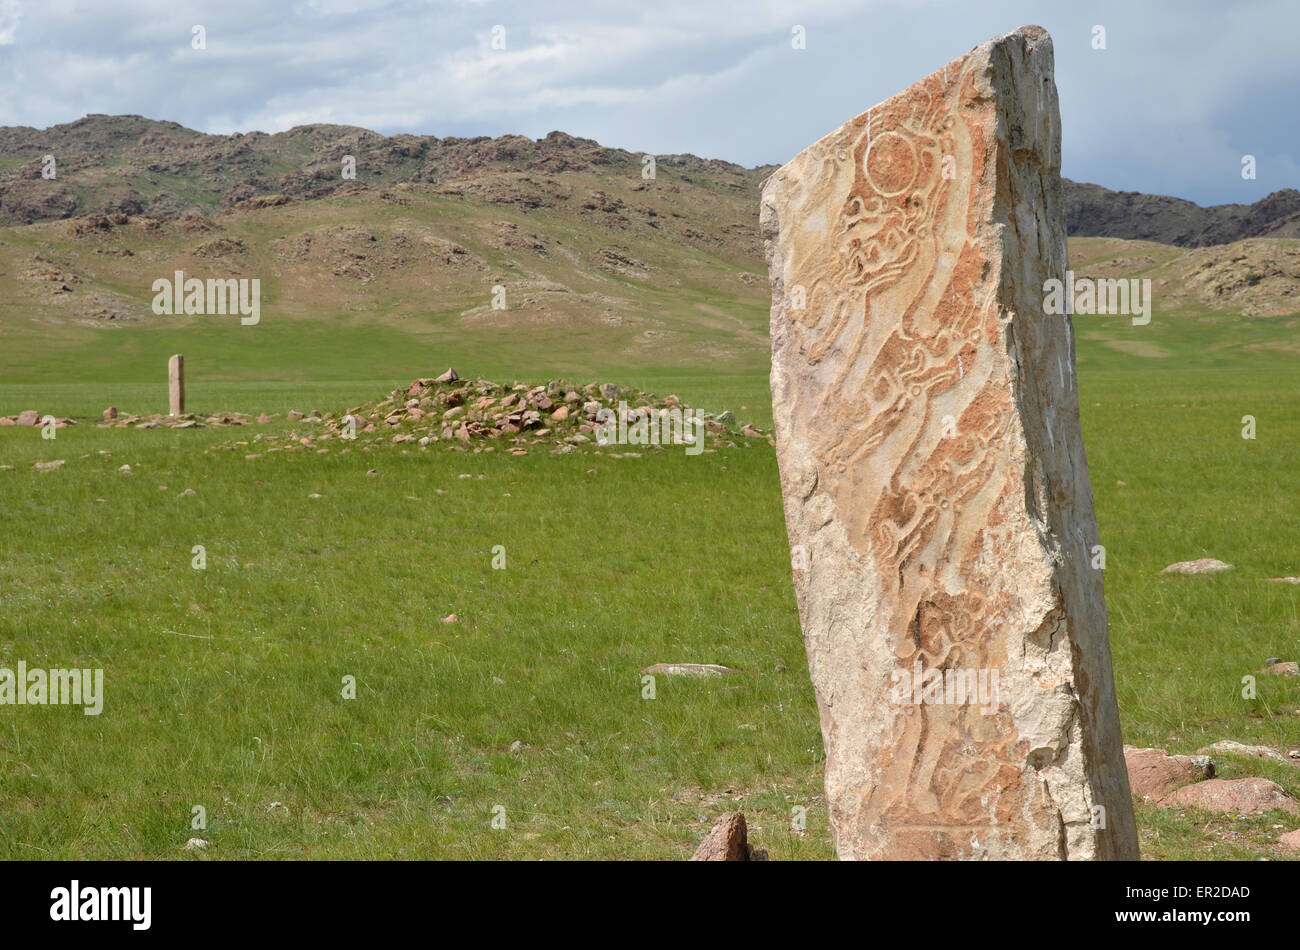 Deer stones and burial mounds near the city of Moron, Ovsgol province, northern Mongolia. Stock Photo